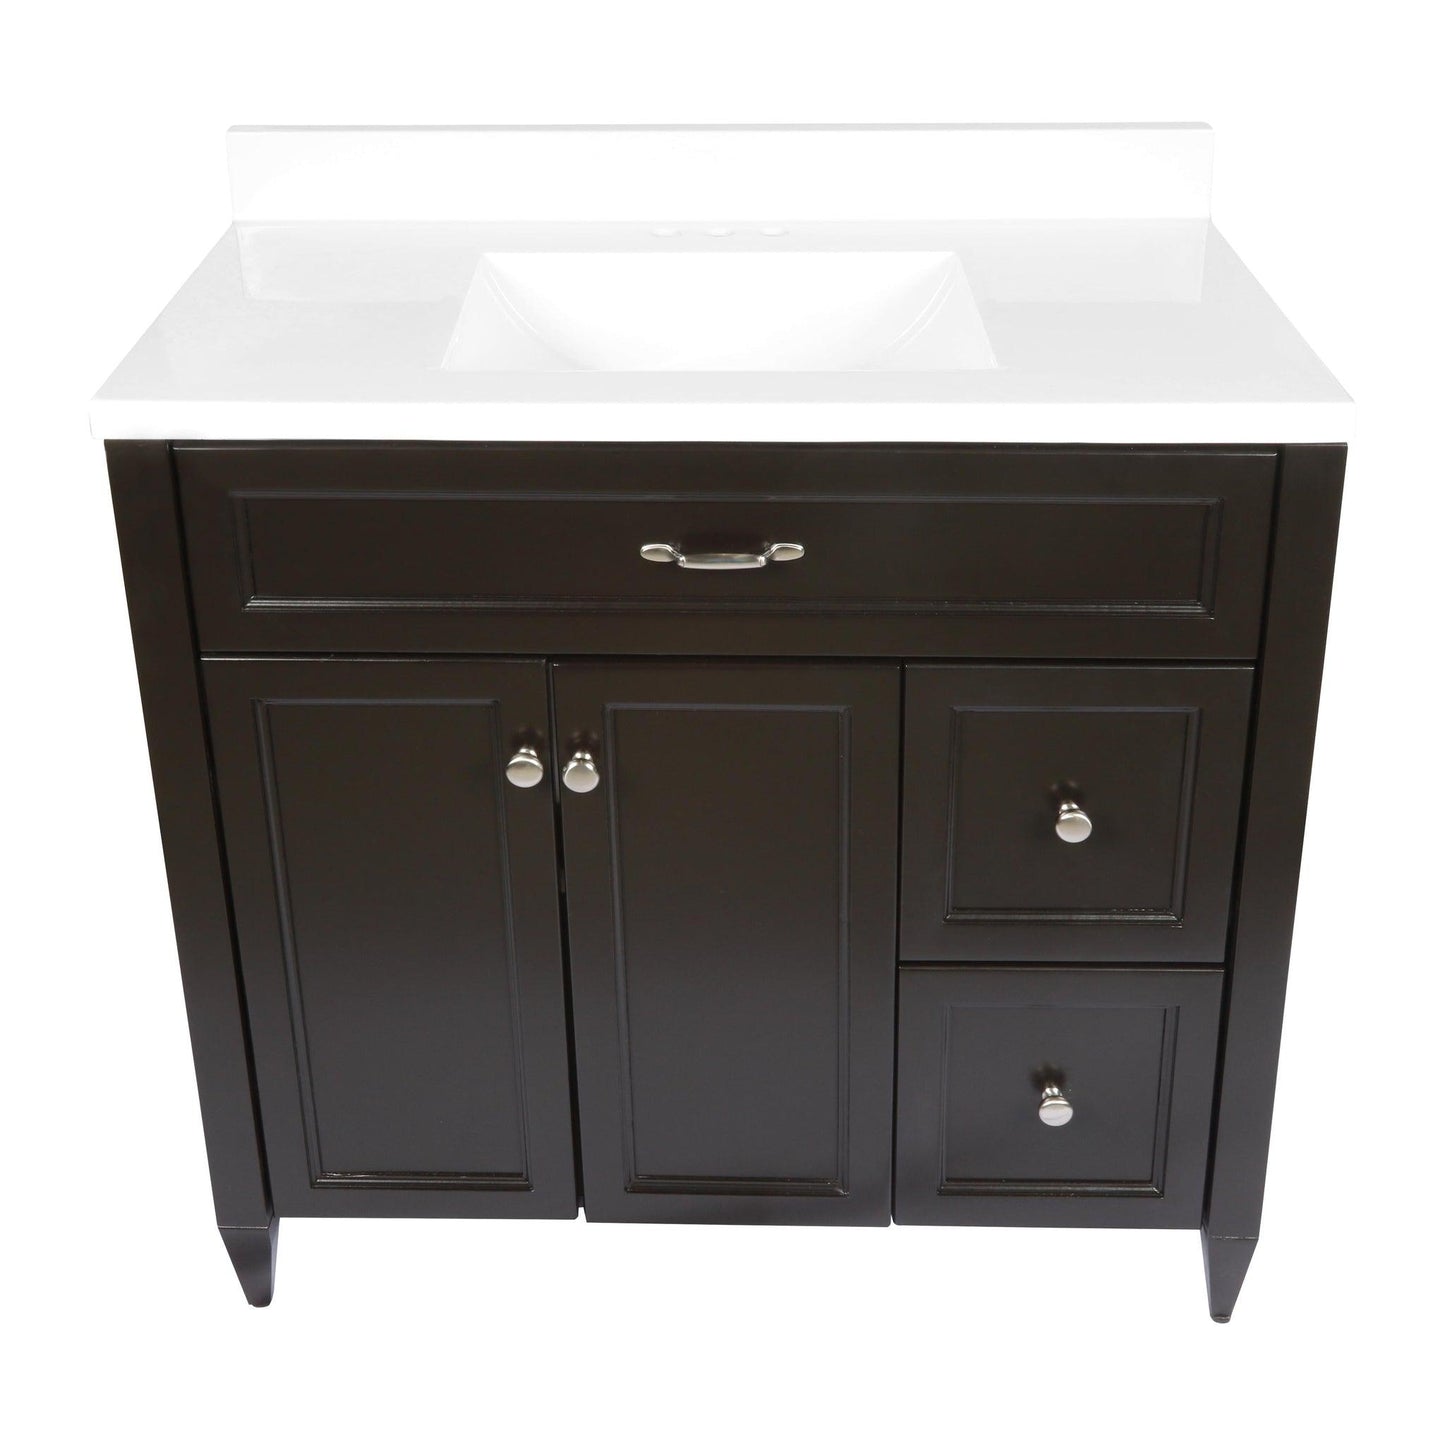 Ella’s Bubbles Vail 37" Espresso Bathroom Vanity With White Cultured Marble Top With White Backsplash and Sink